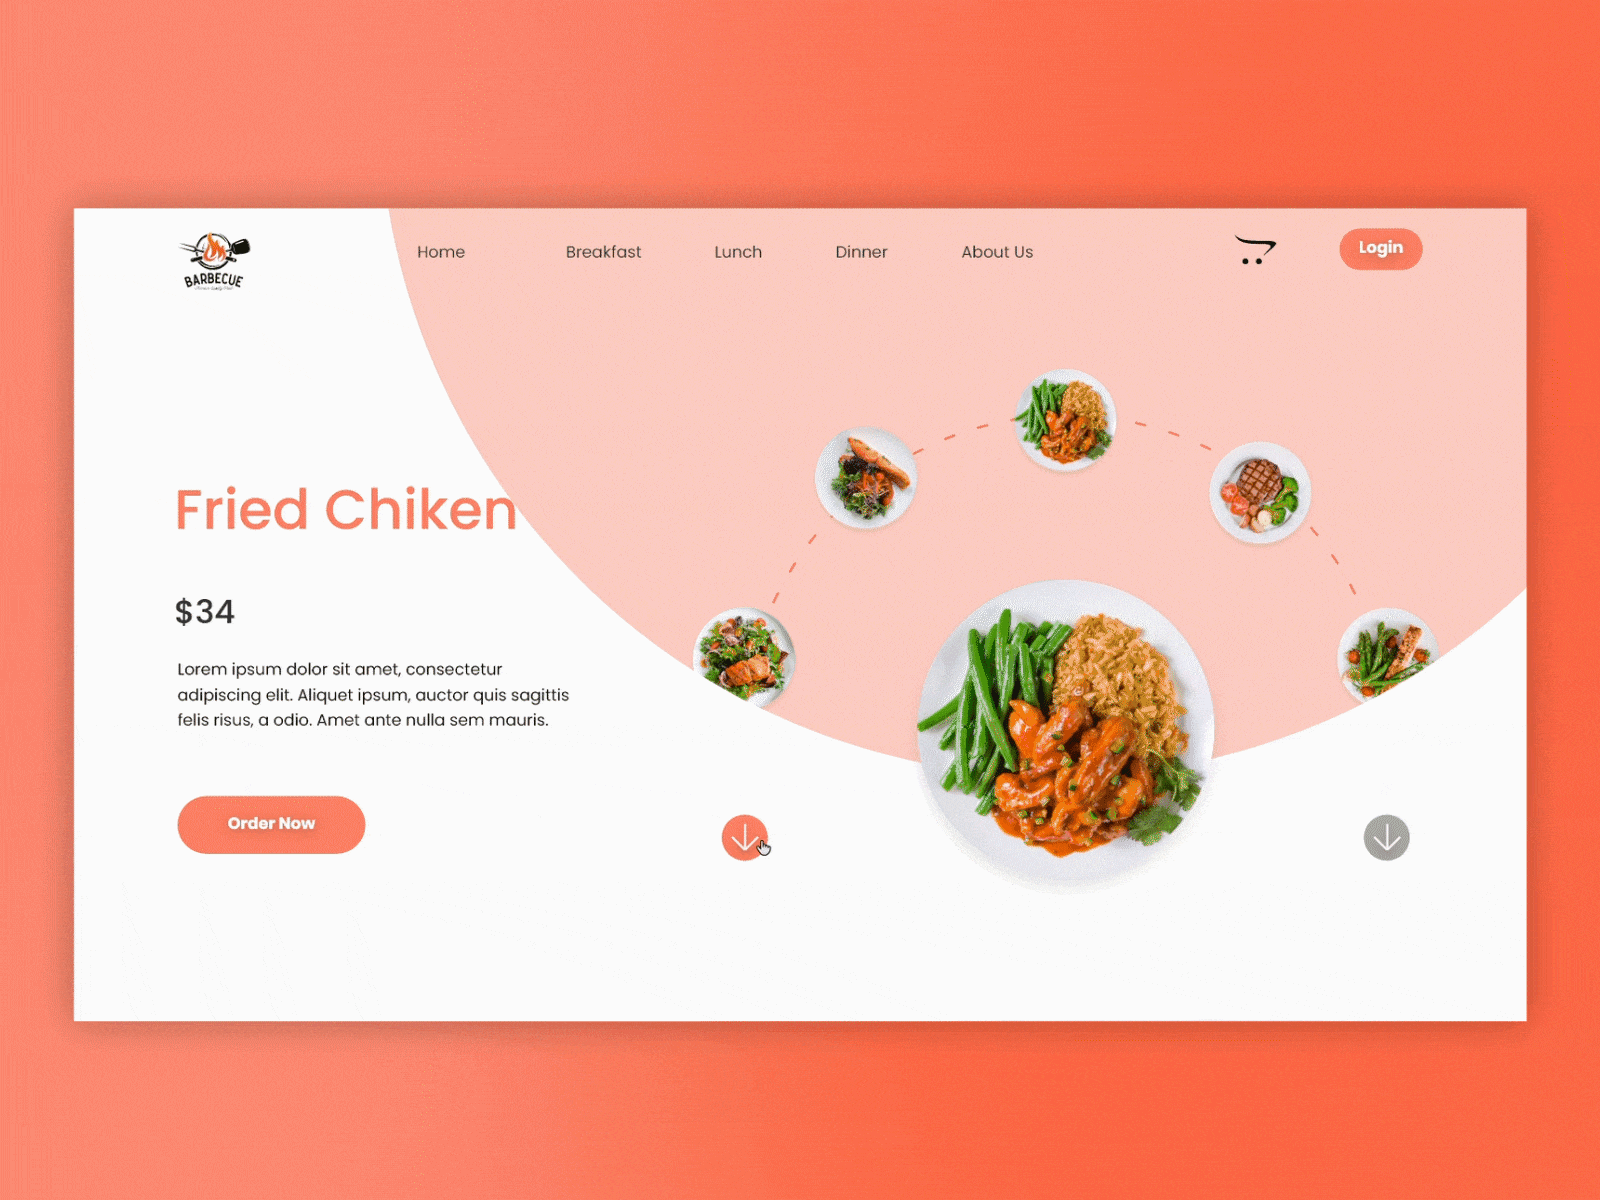 Animated Food Ordering Landing Page Design animated landing page animatedgif animation food ordering landing page food website food website design food website ui design landing page design landingpage ui ui design website concept